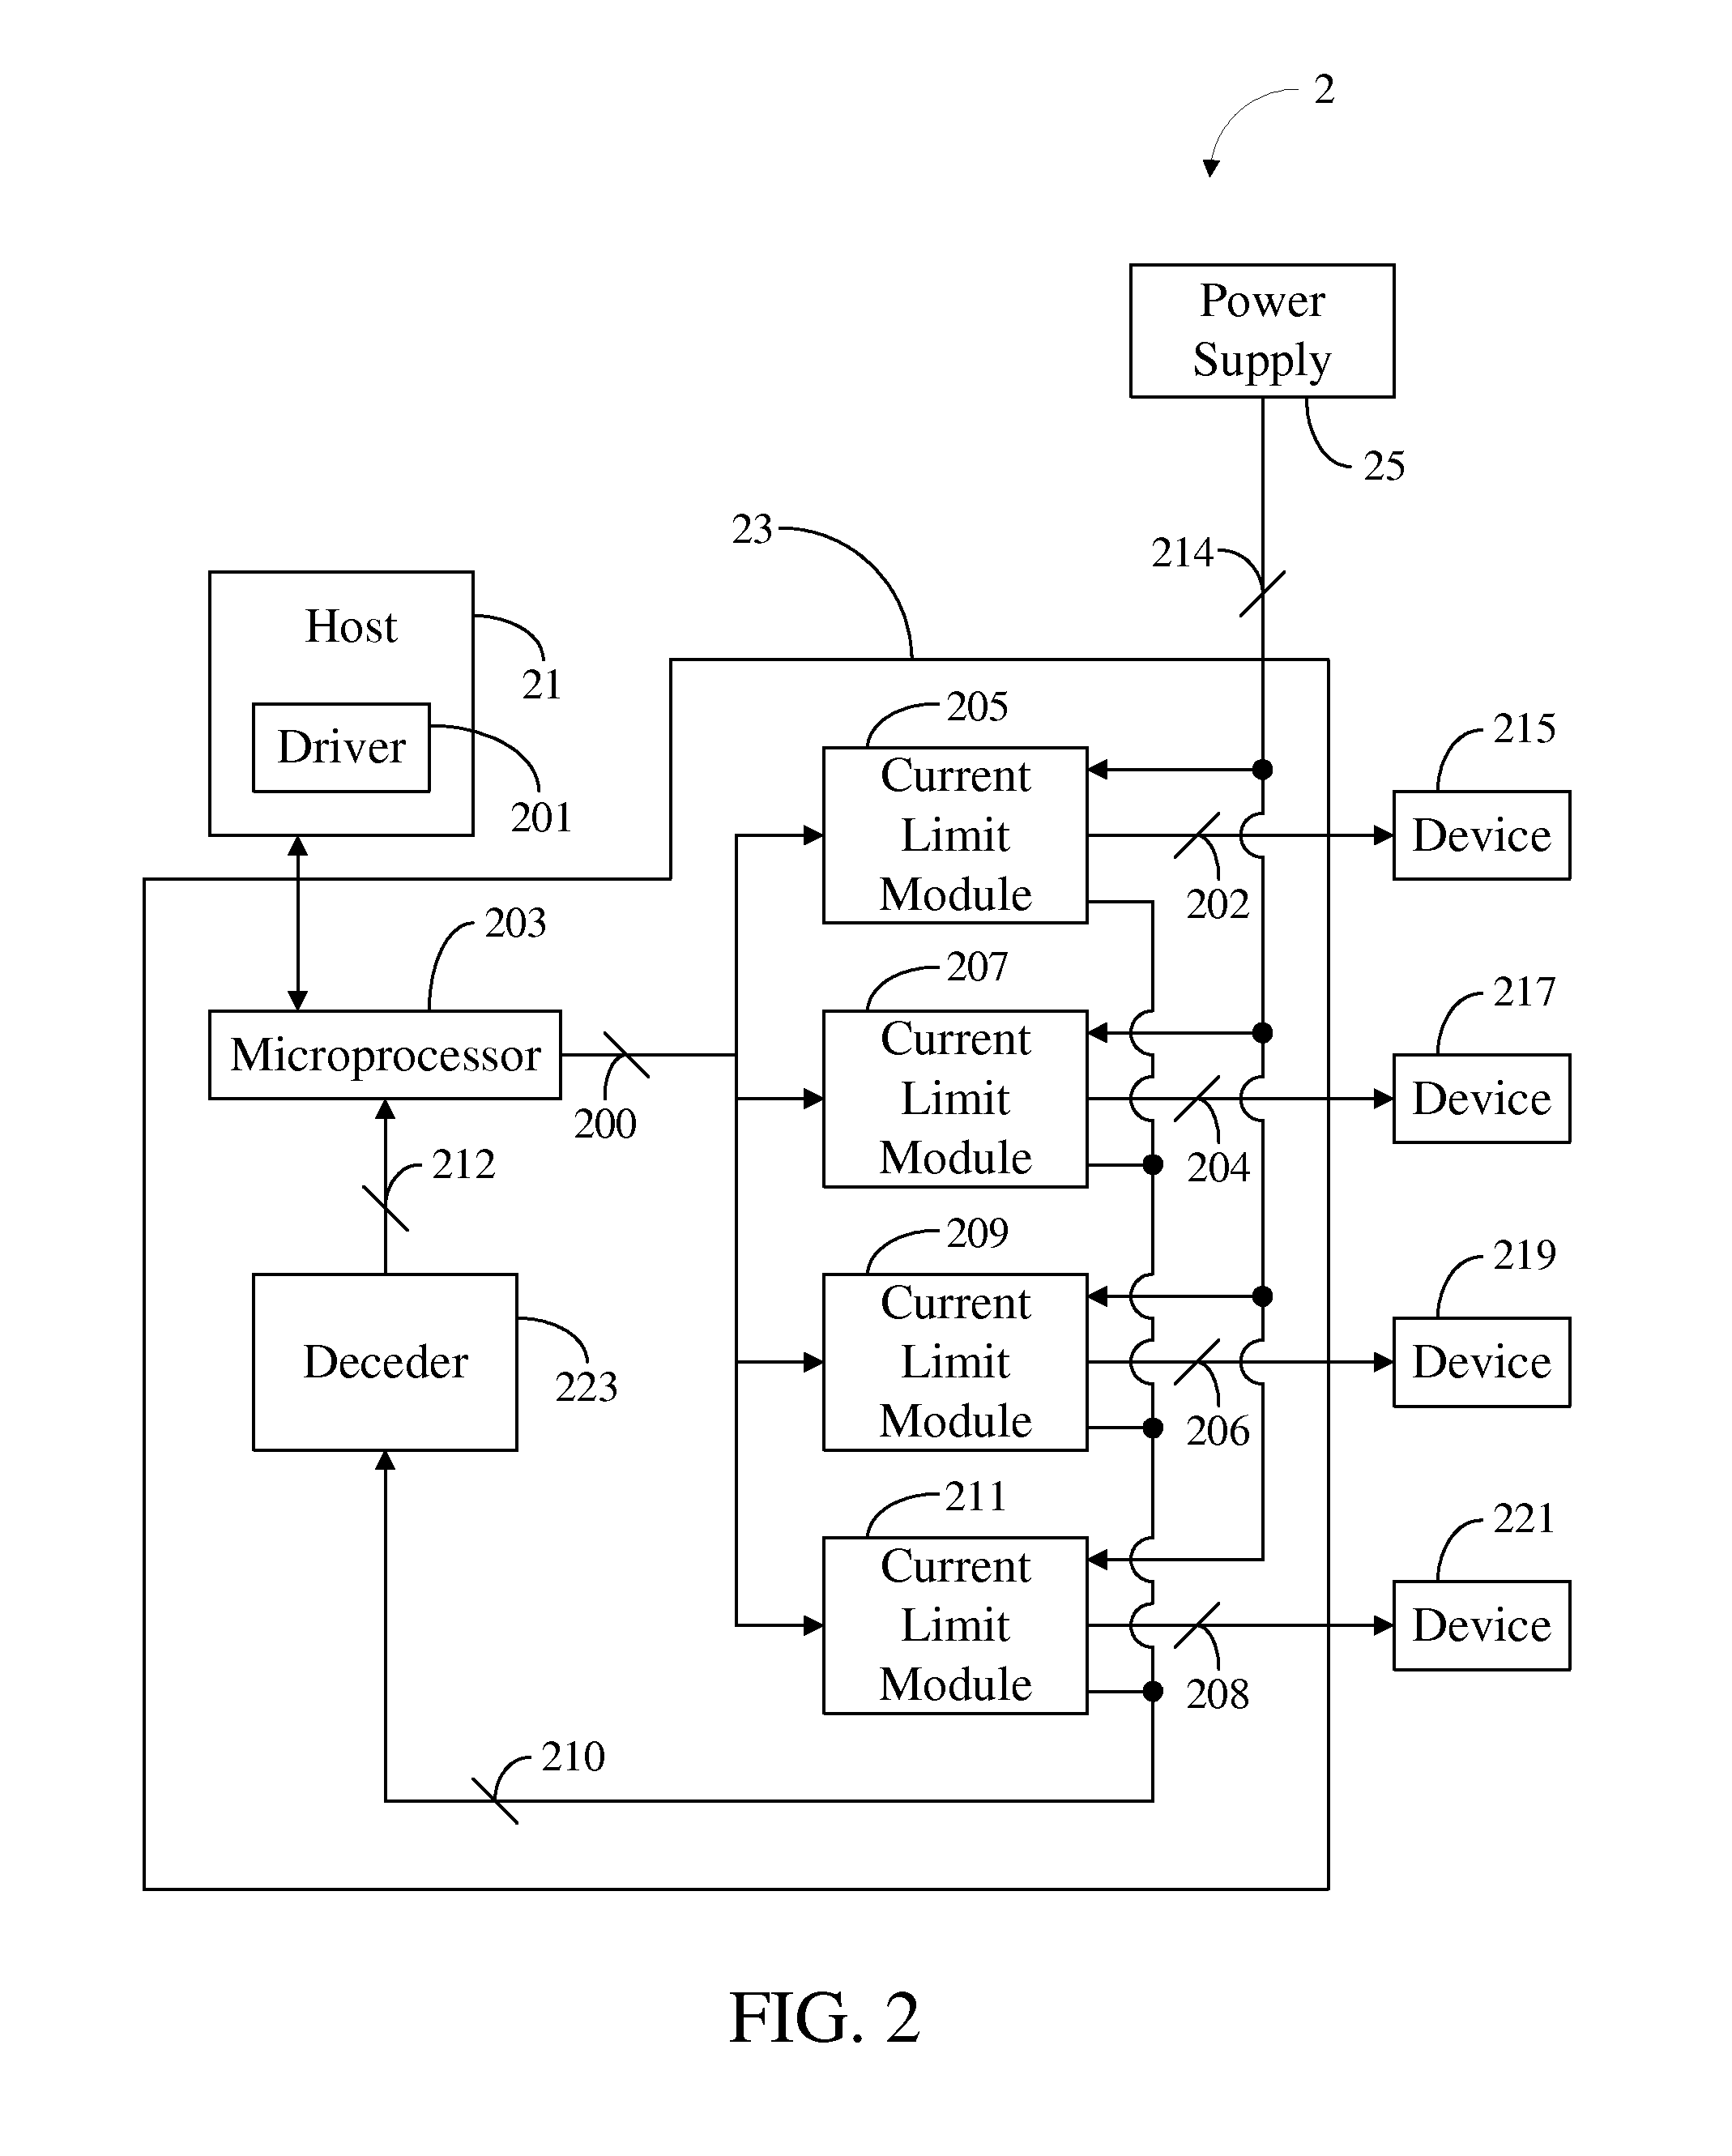 Testing Apparatus, System, and Method for Testing at Least One Device with a Connection Interface